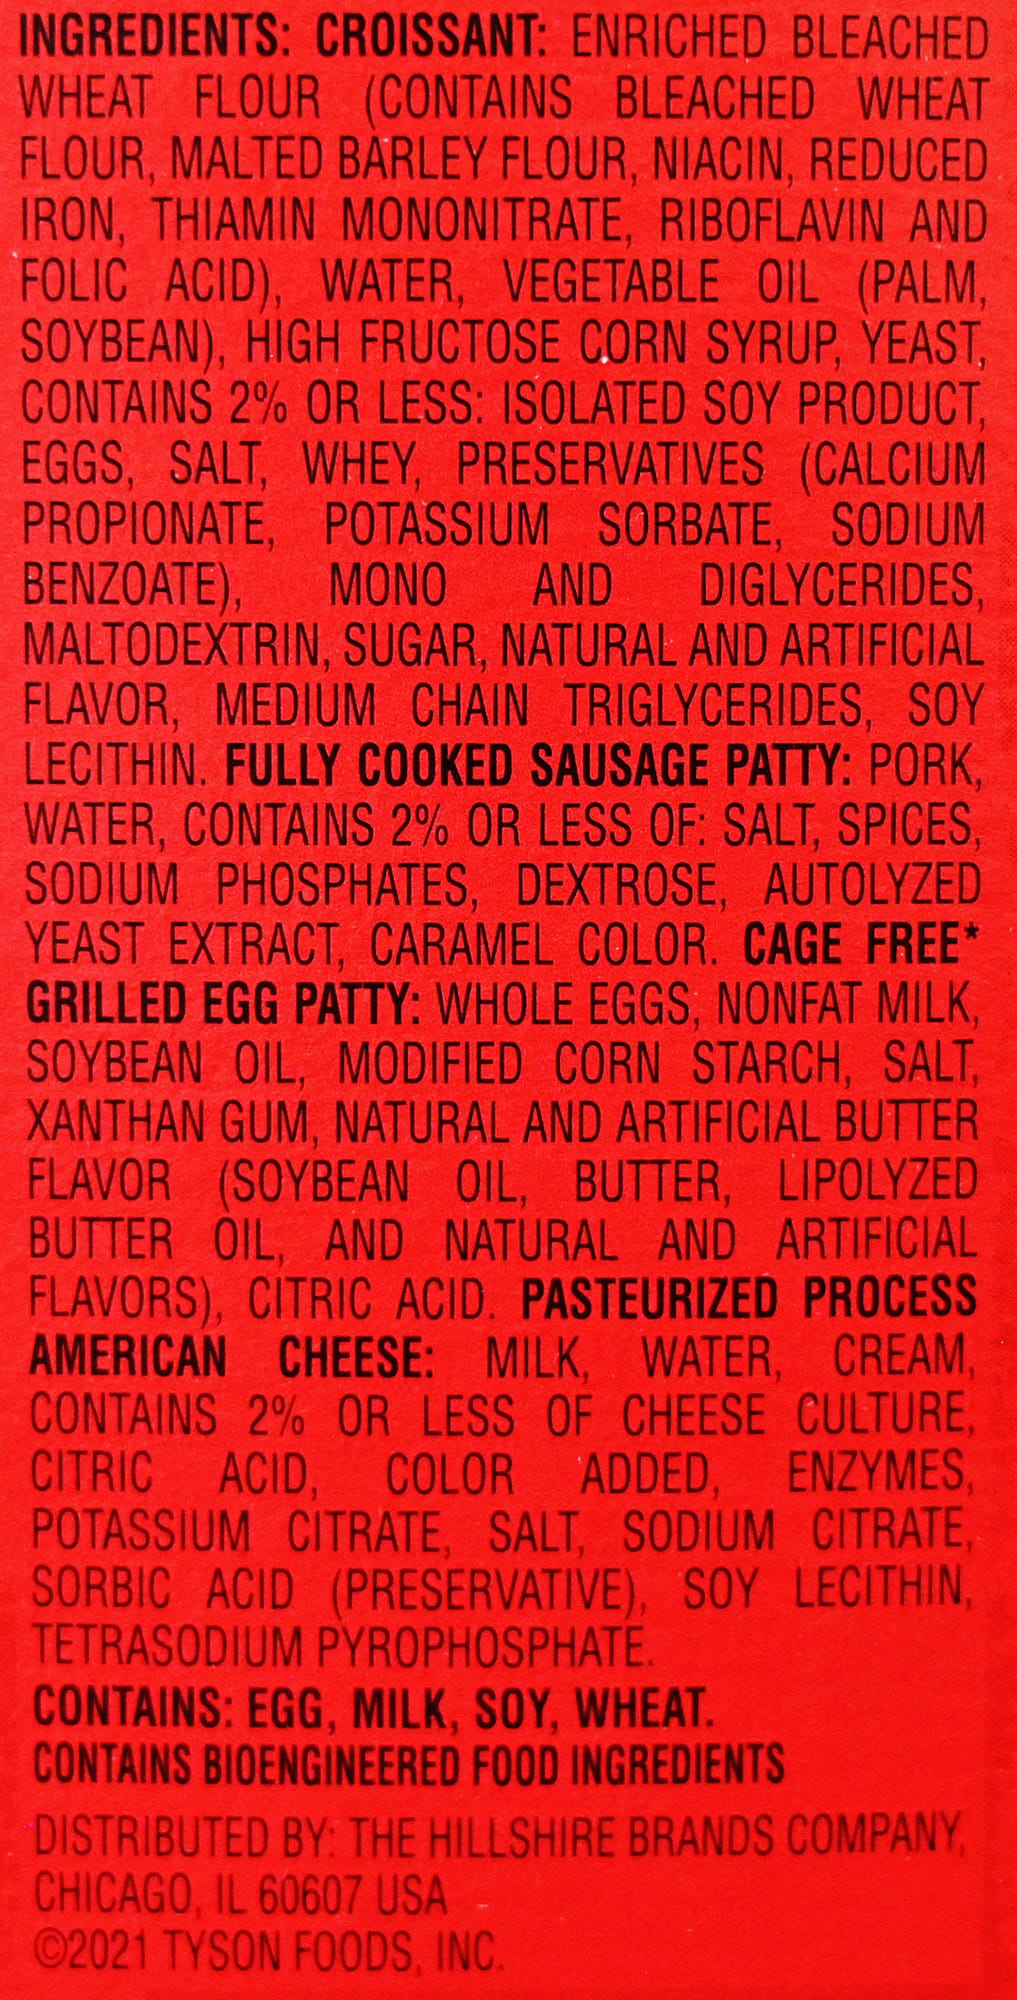 Image of the ingredients list for the croissant sandwiches from the back of the box.